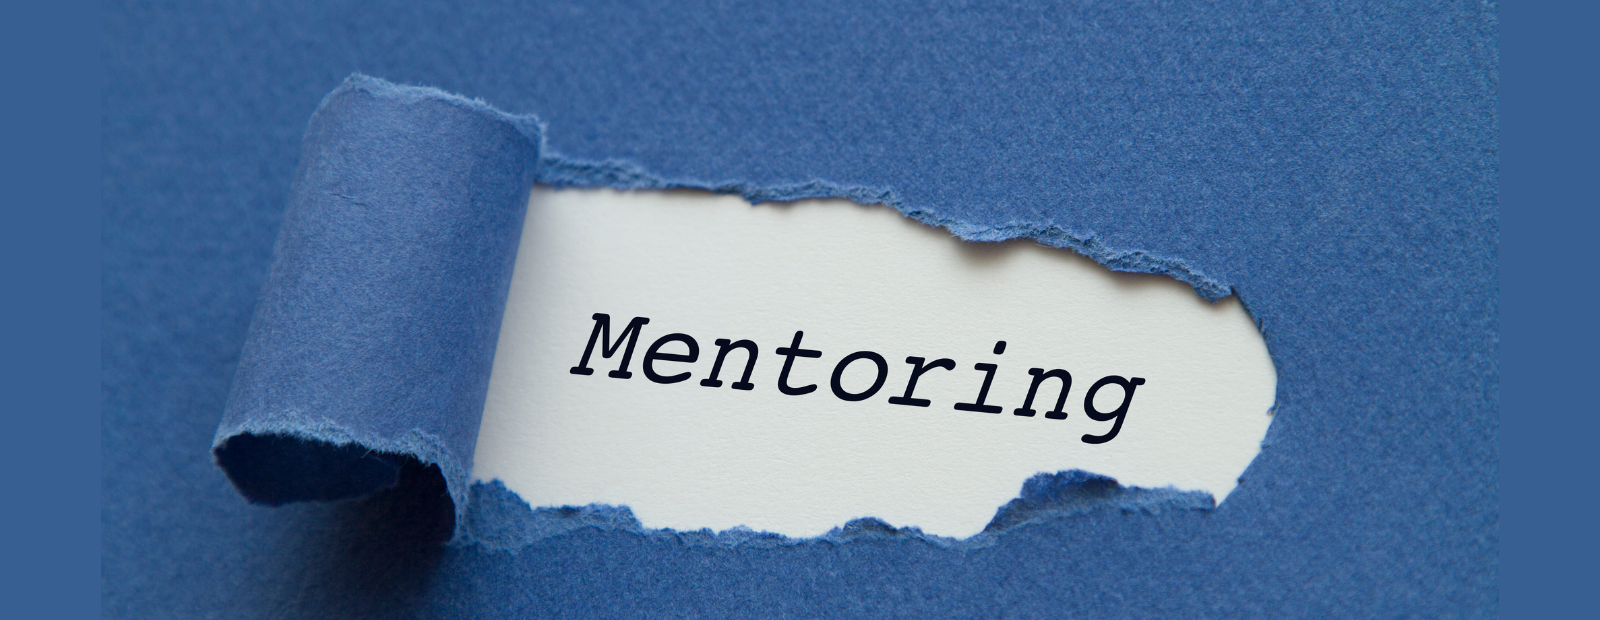 Mentoring and role models – can you see me?